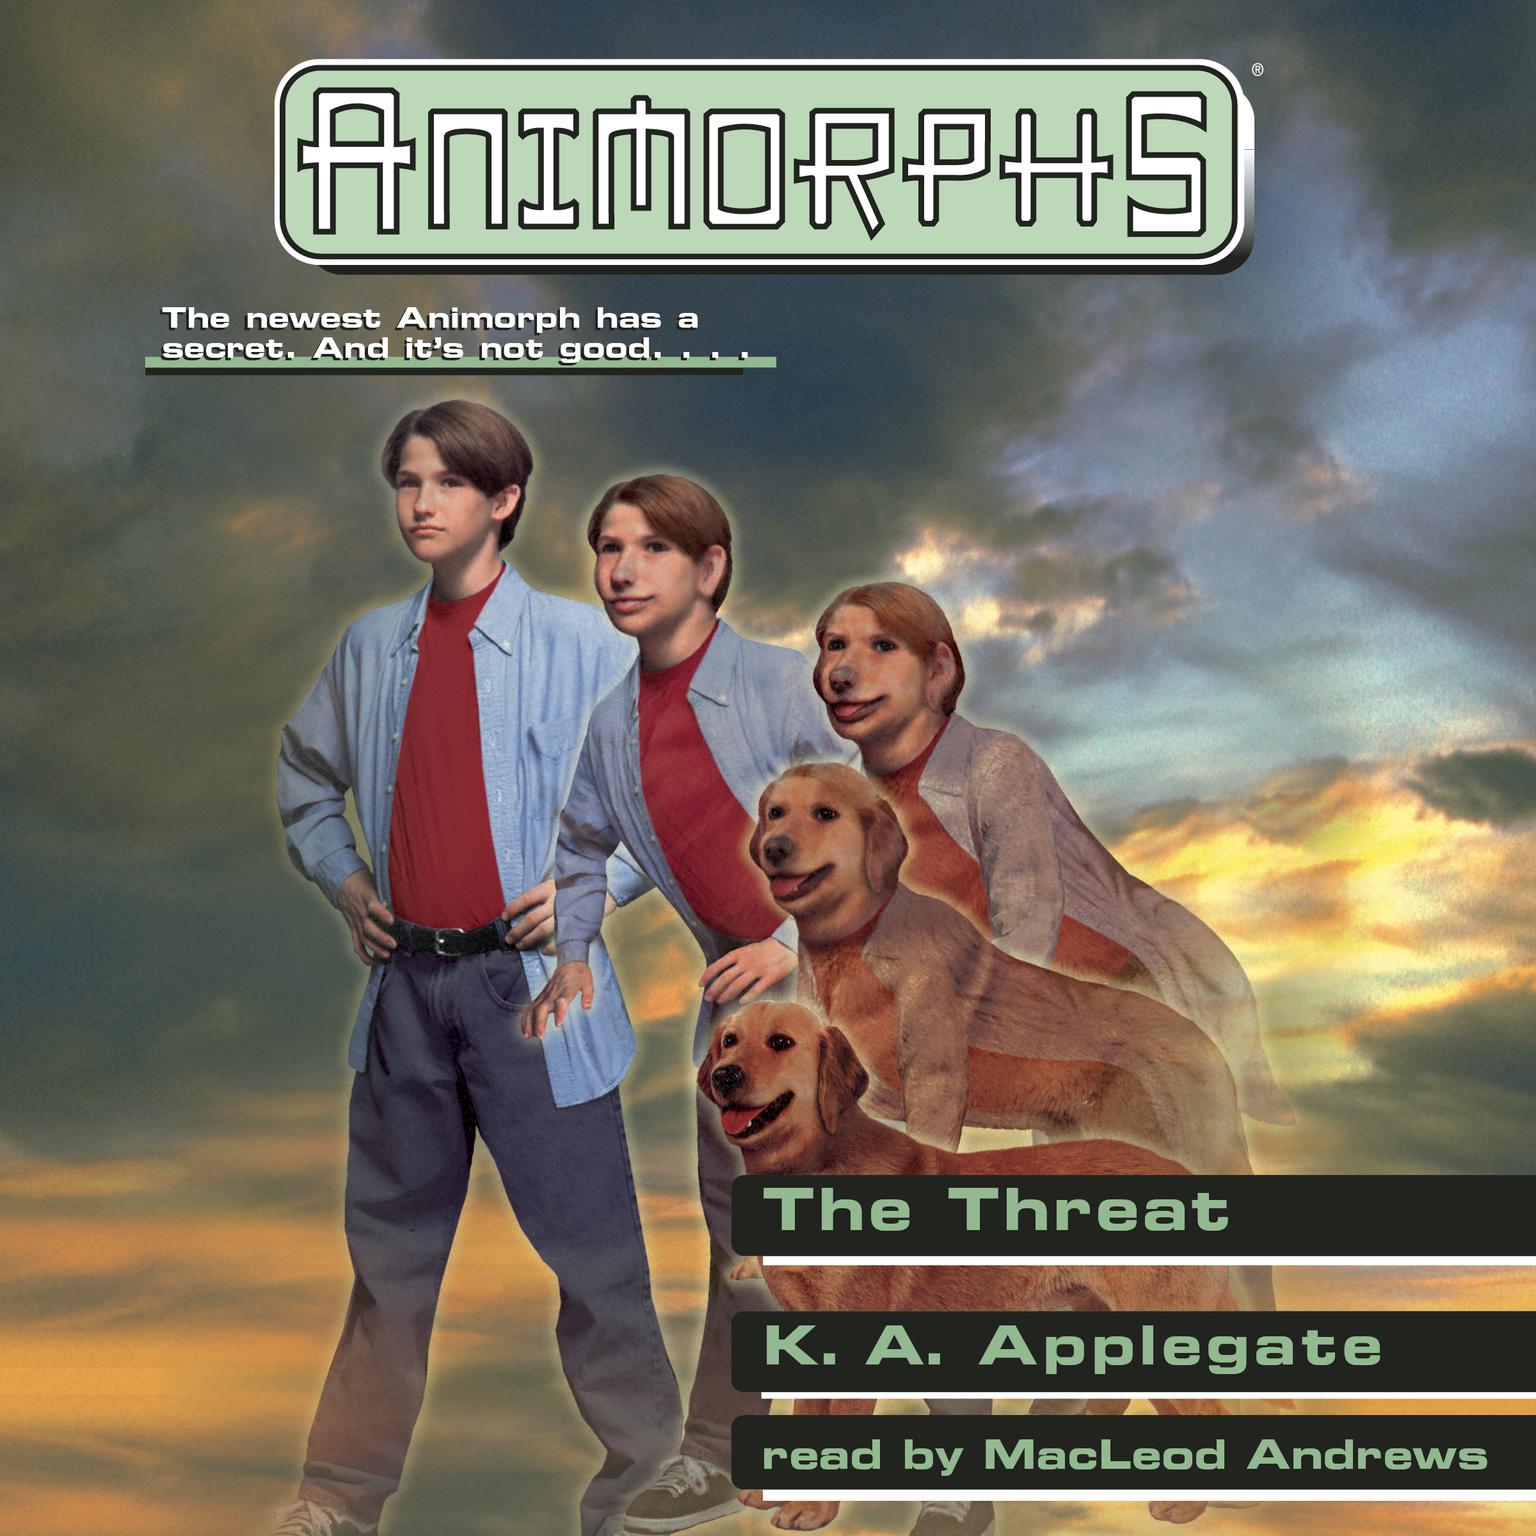 The Threat (Animorphs #21) Audiobook, by K. A. Applegate